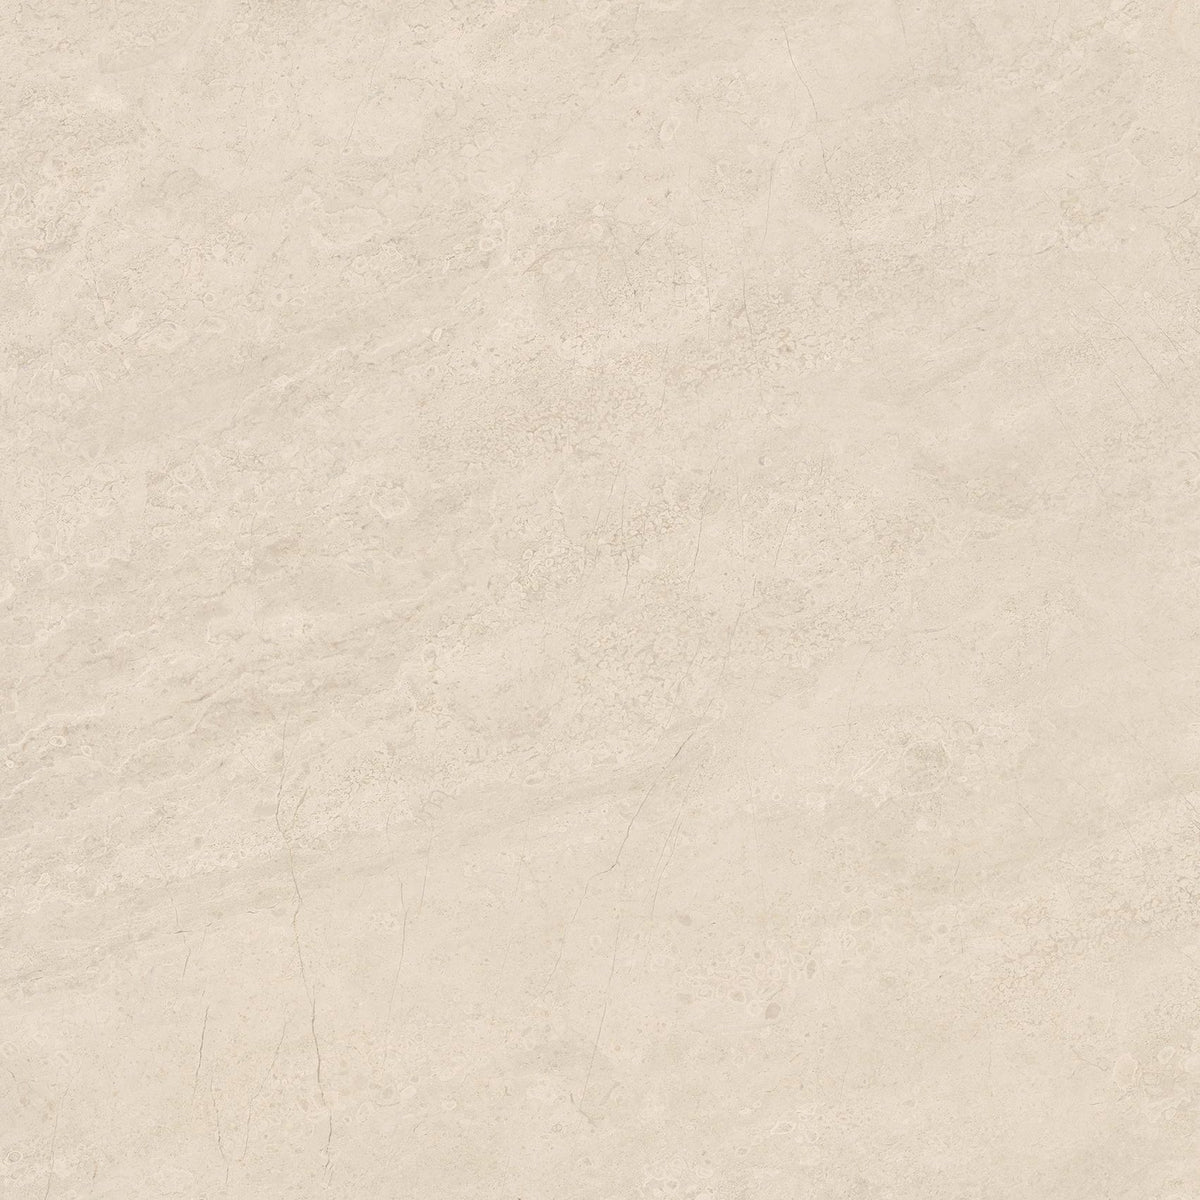 Anatolia Mayfair 24 in. x 24 in. HD Rectified Porcelain Tile - Allure Ivory (Polished)